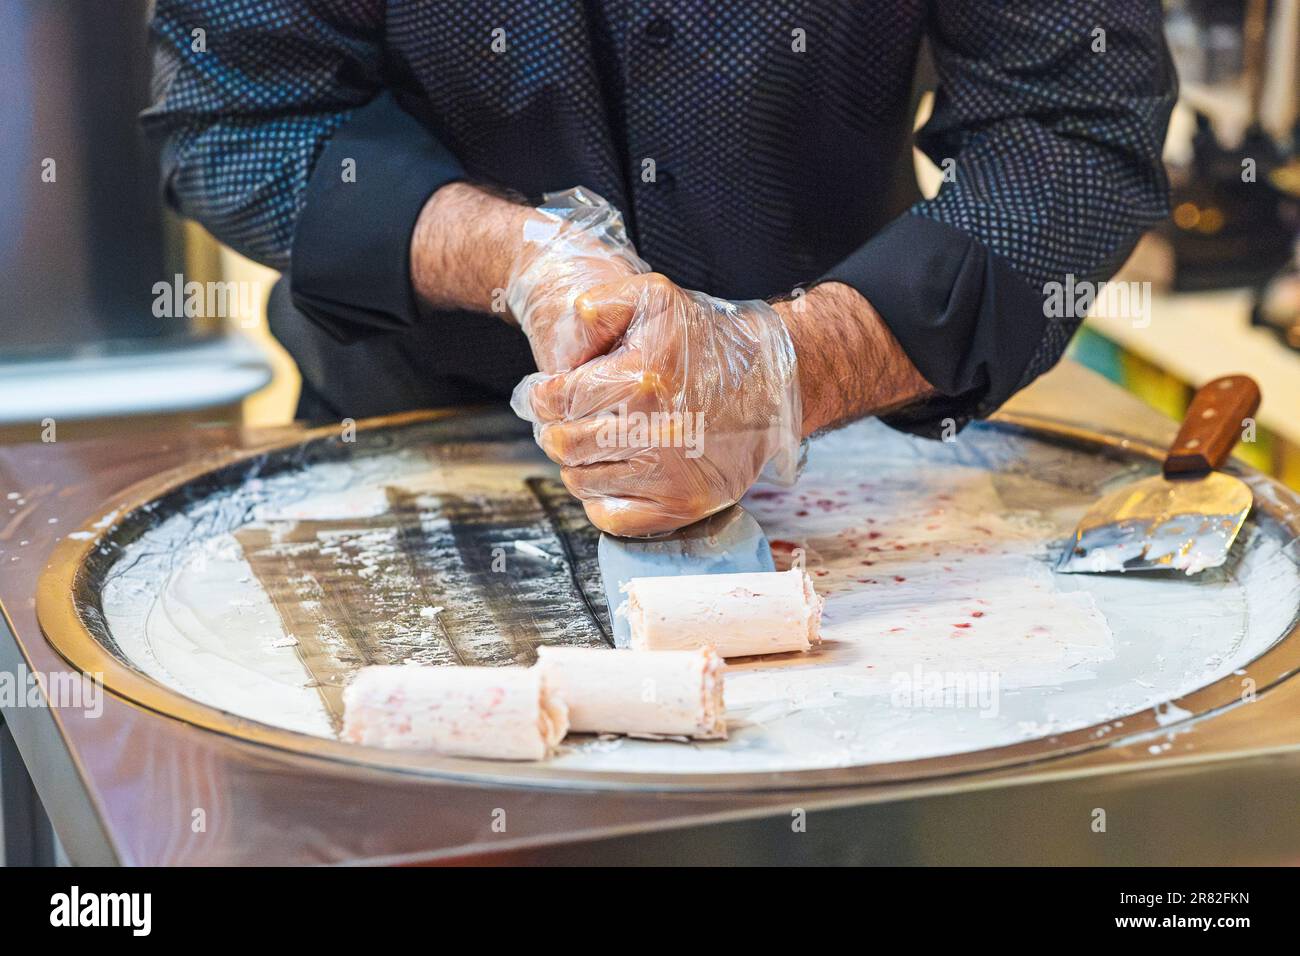 Making Rolled Ice Cream, Roll-Up Stock Photo